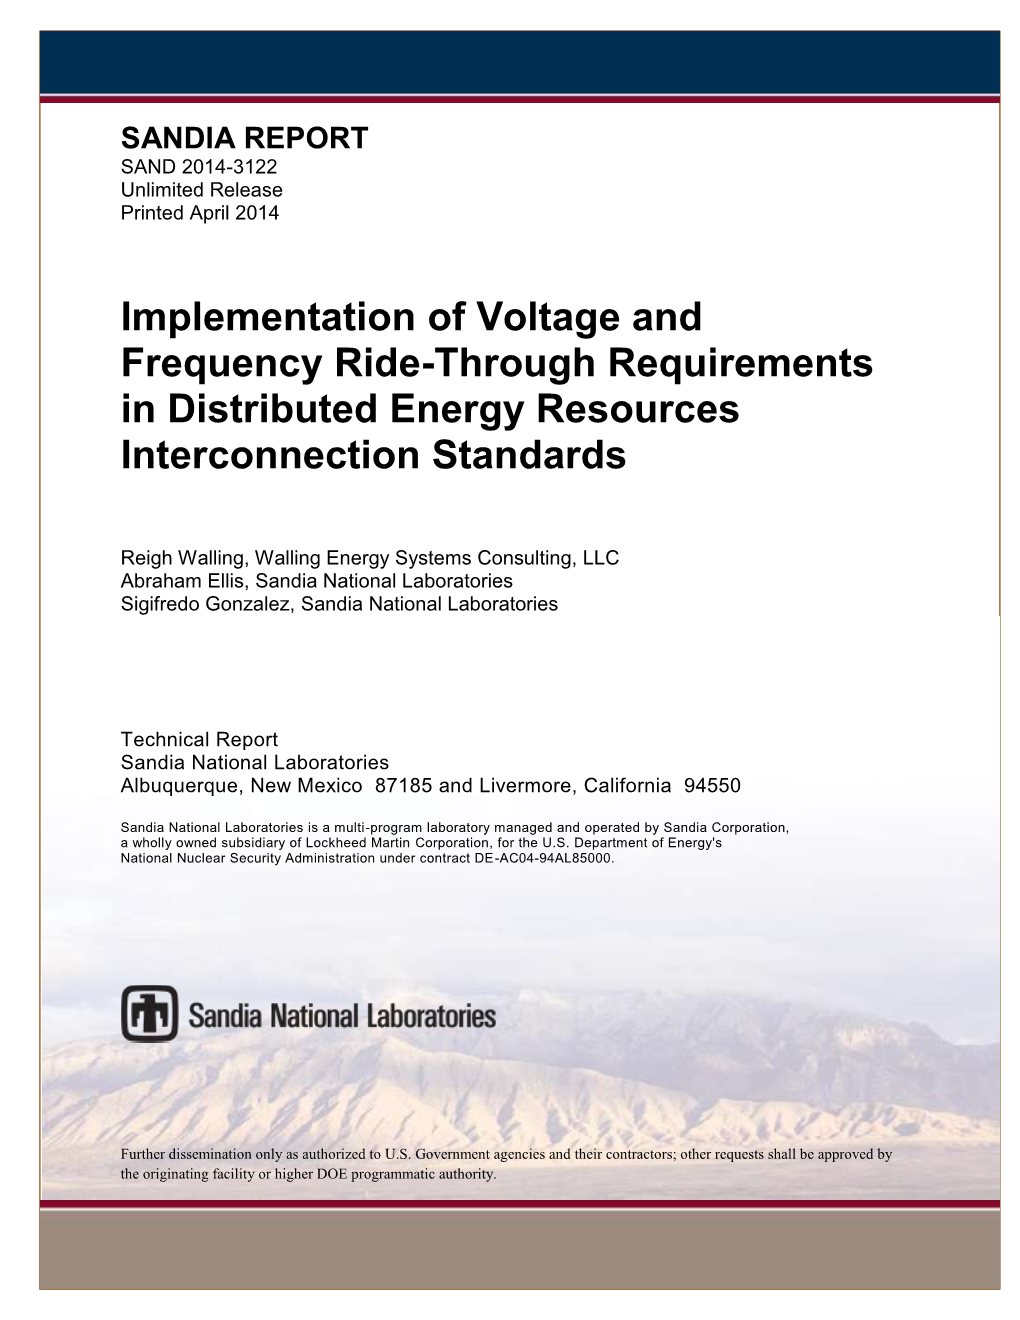 Implementation of Voltage and Frequency Ride-Through Requirements in Distributed Energy Resources Interconnection Standards